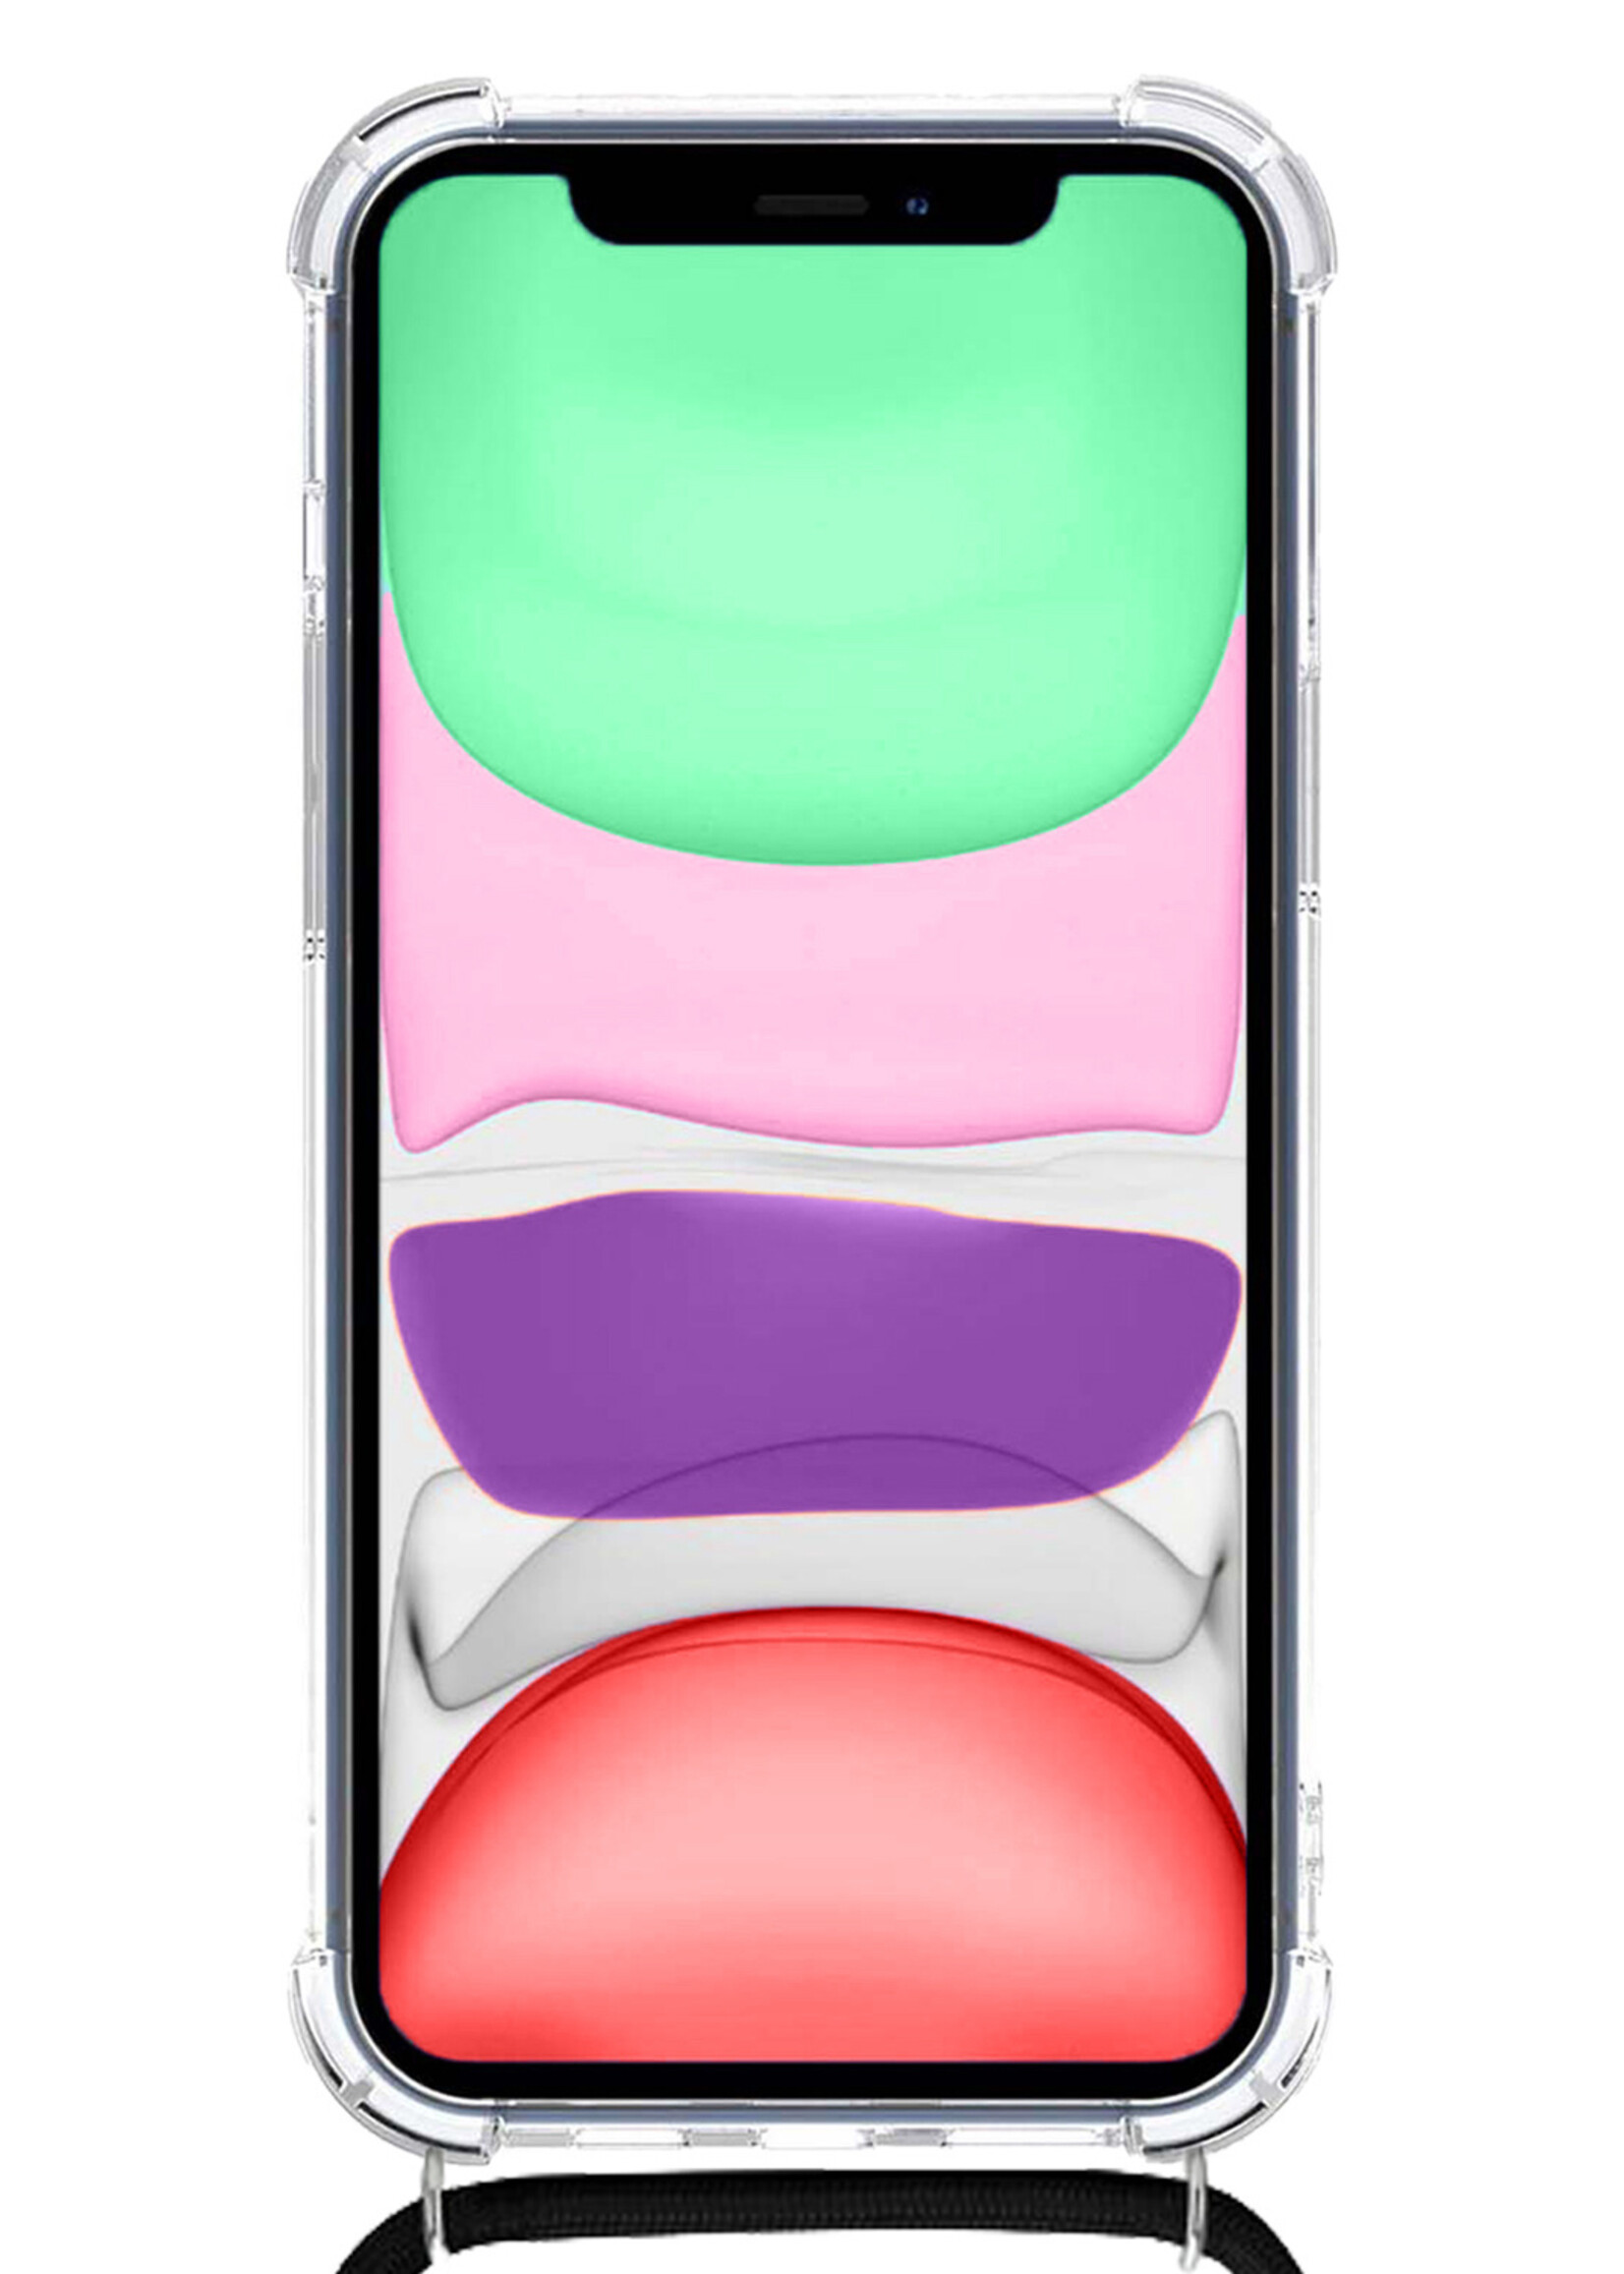 BTH Hoes voor iPhone Xs Max Hoesje Siliconen Met Koord Shock Proof Case Hoes Transparant - Hoes voor iPhone Xs Max Hoesje Koord Cover - Transparant